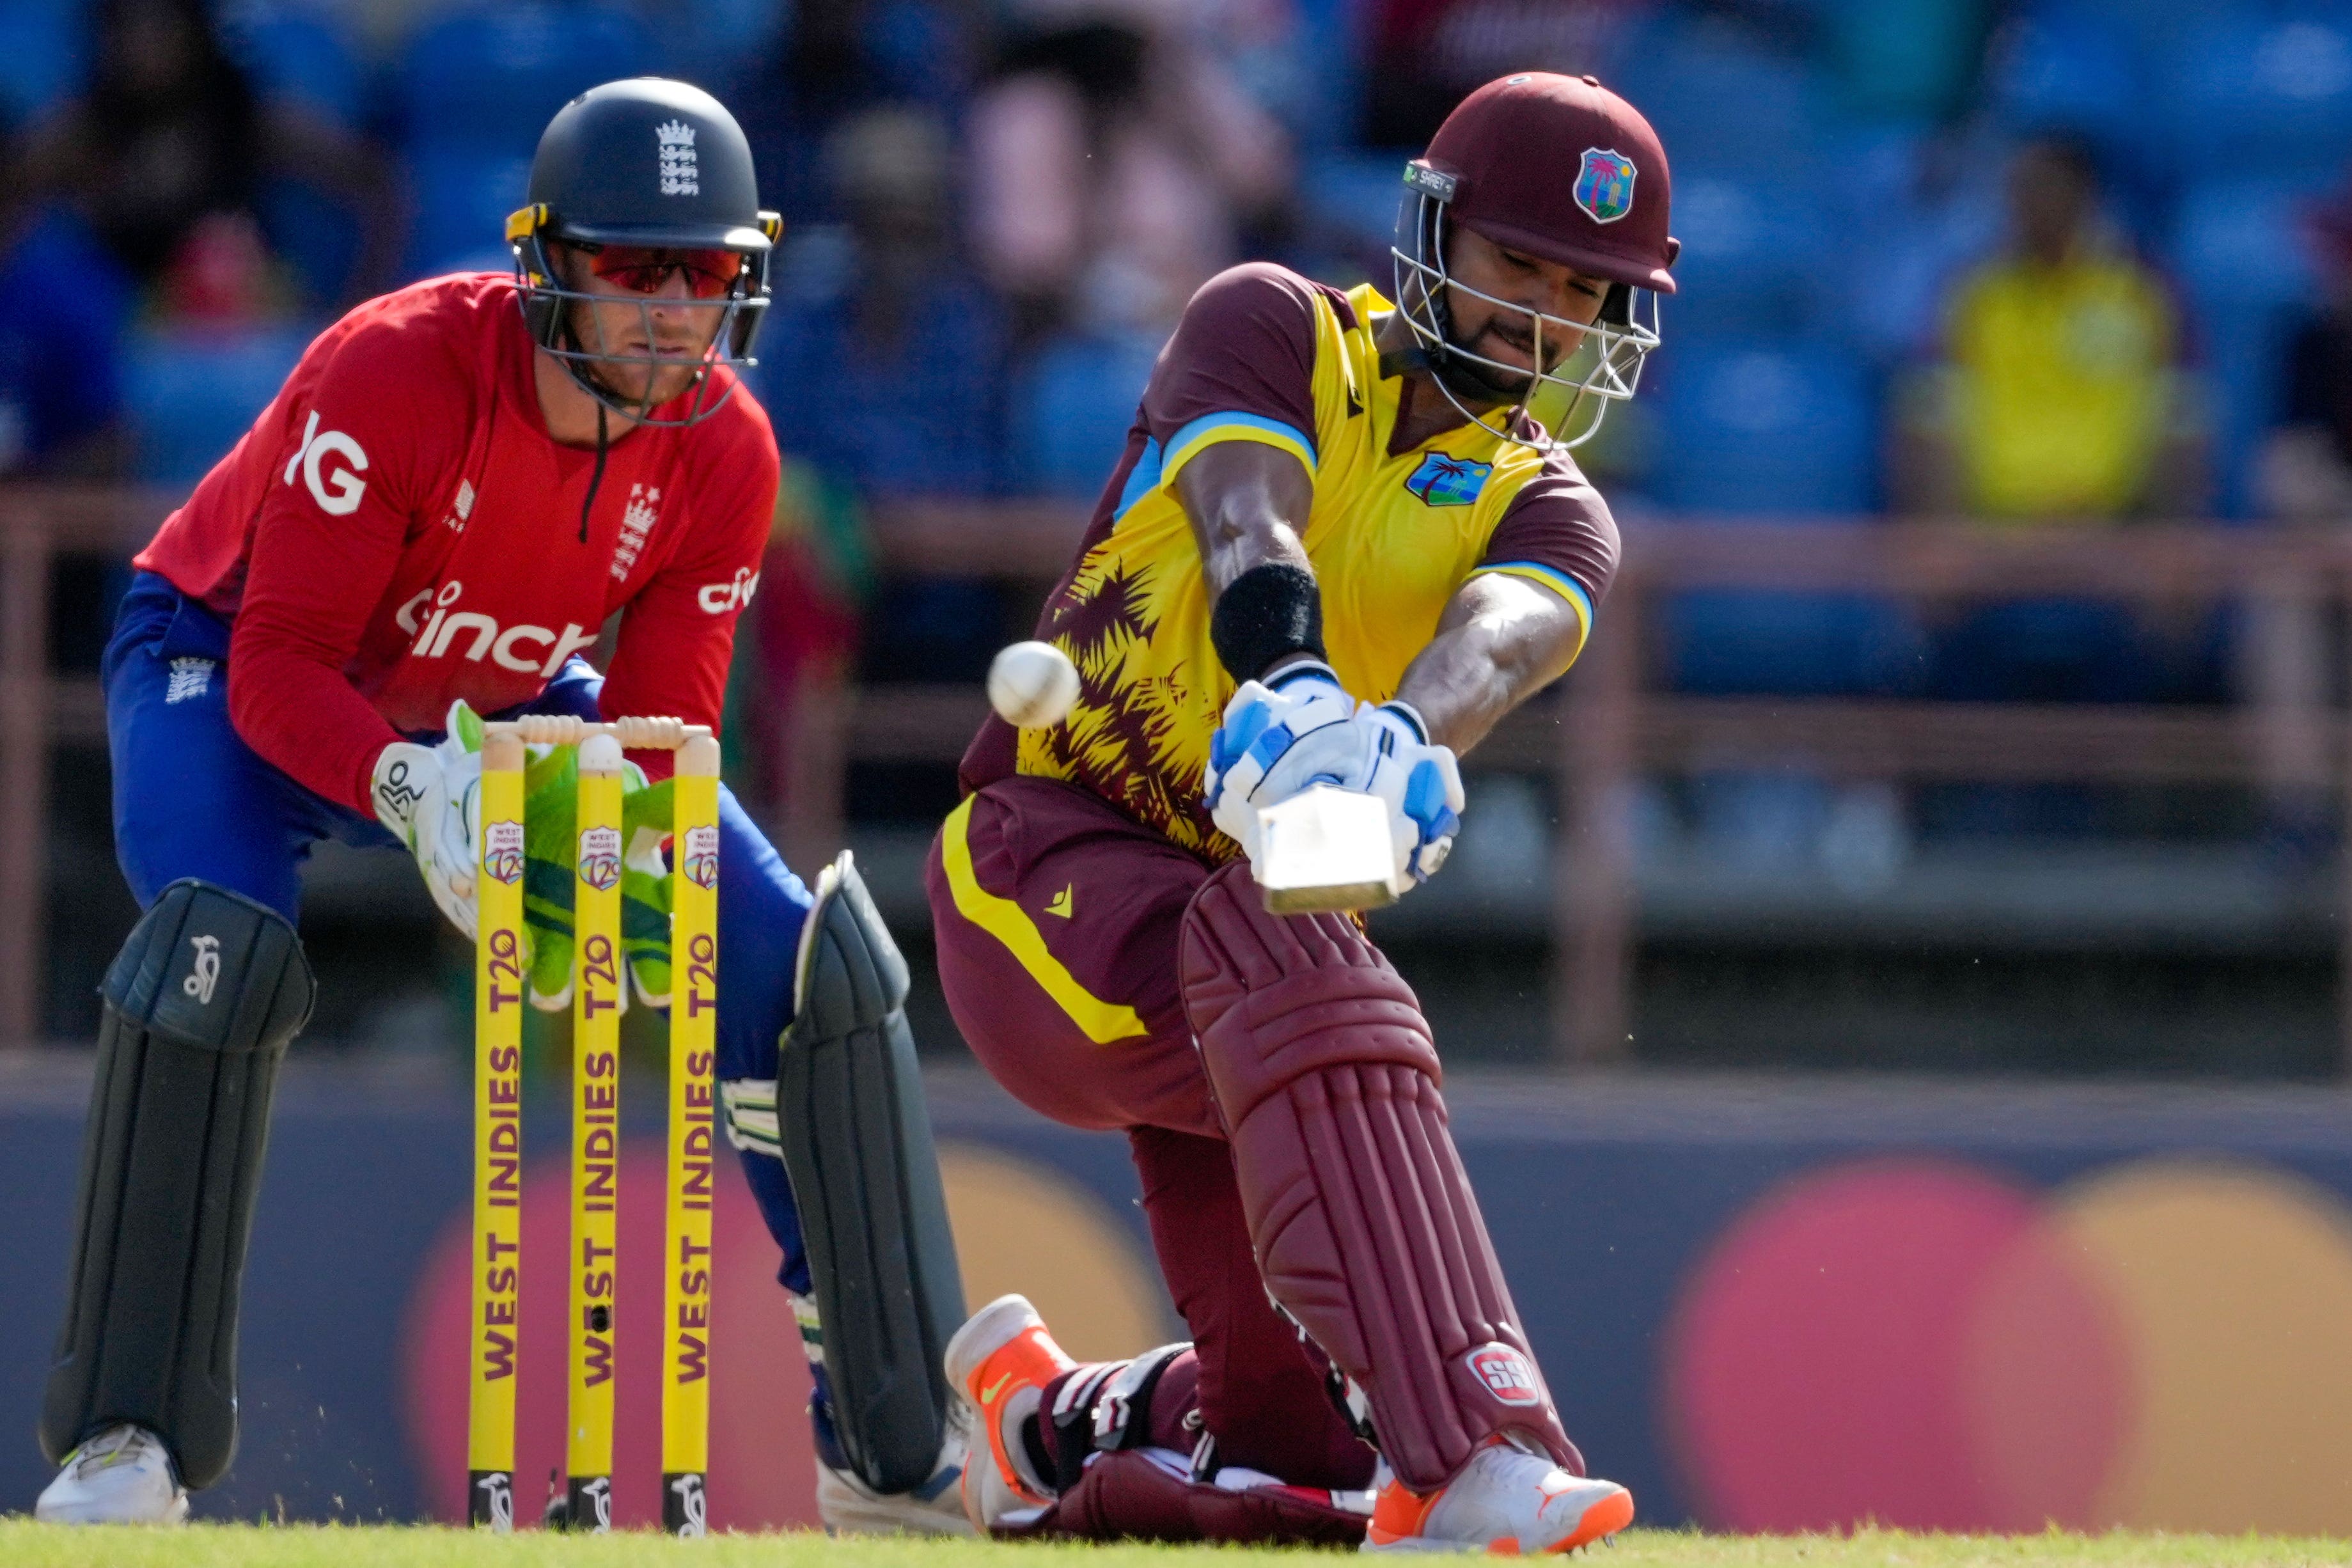 Nicholas Pooran is one of a phalanx of hitters in the West Indies squad